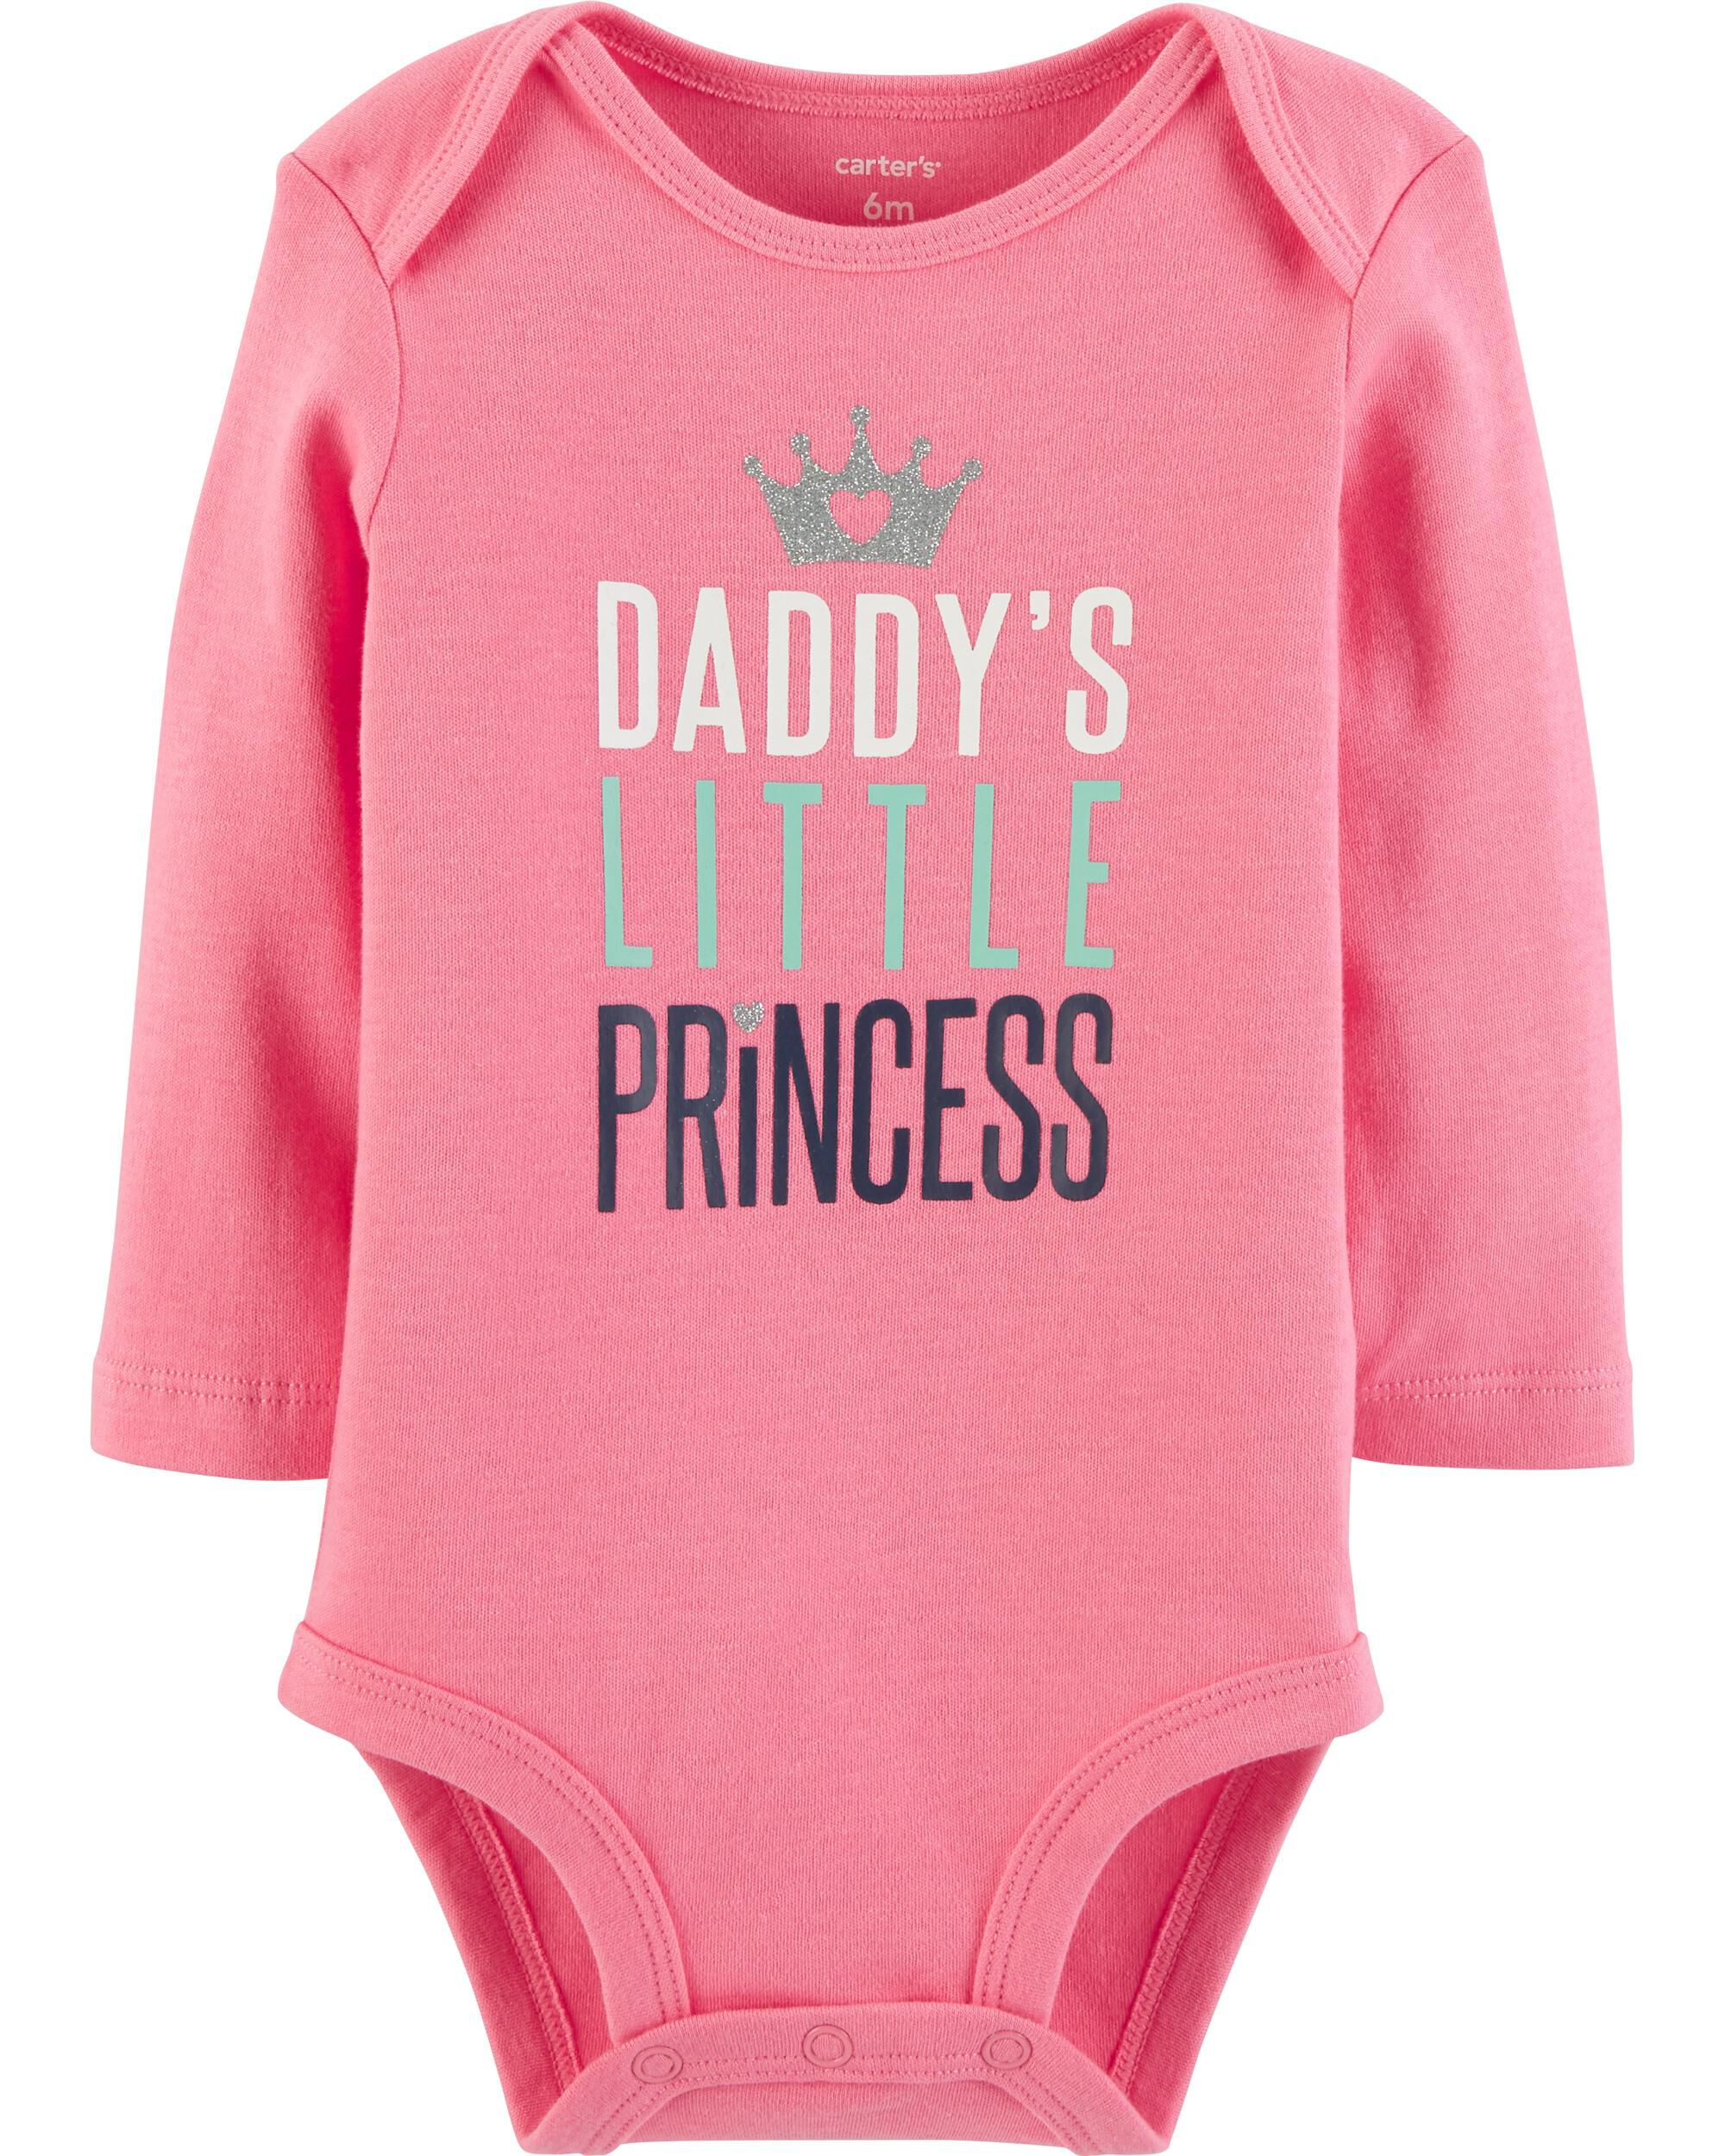 daddy's little girl baby clothes